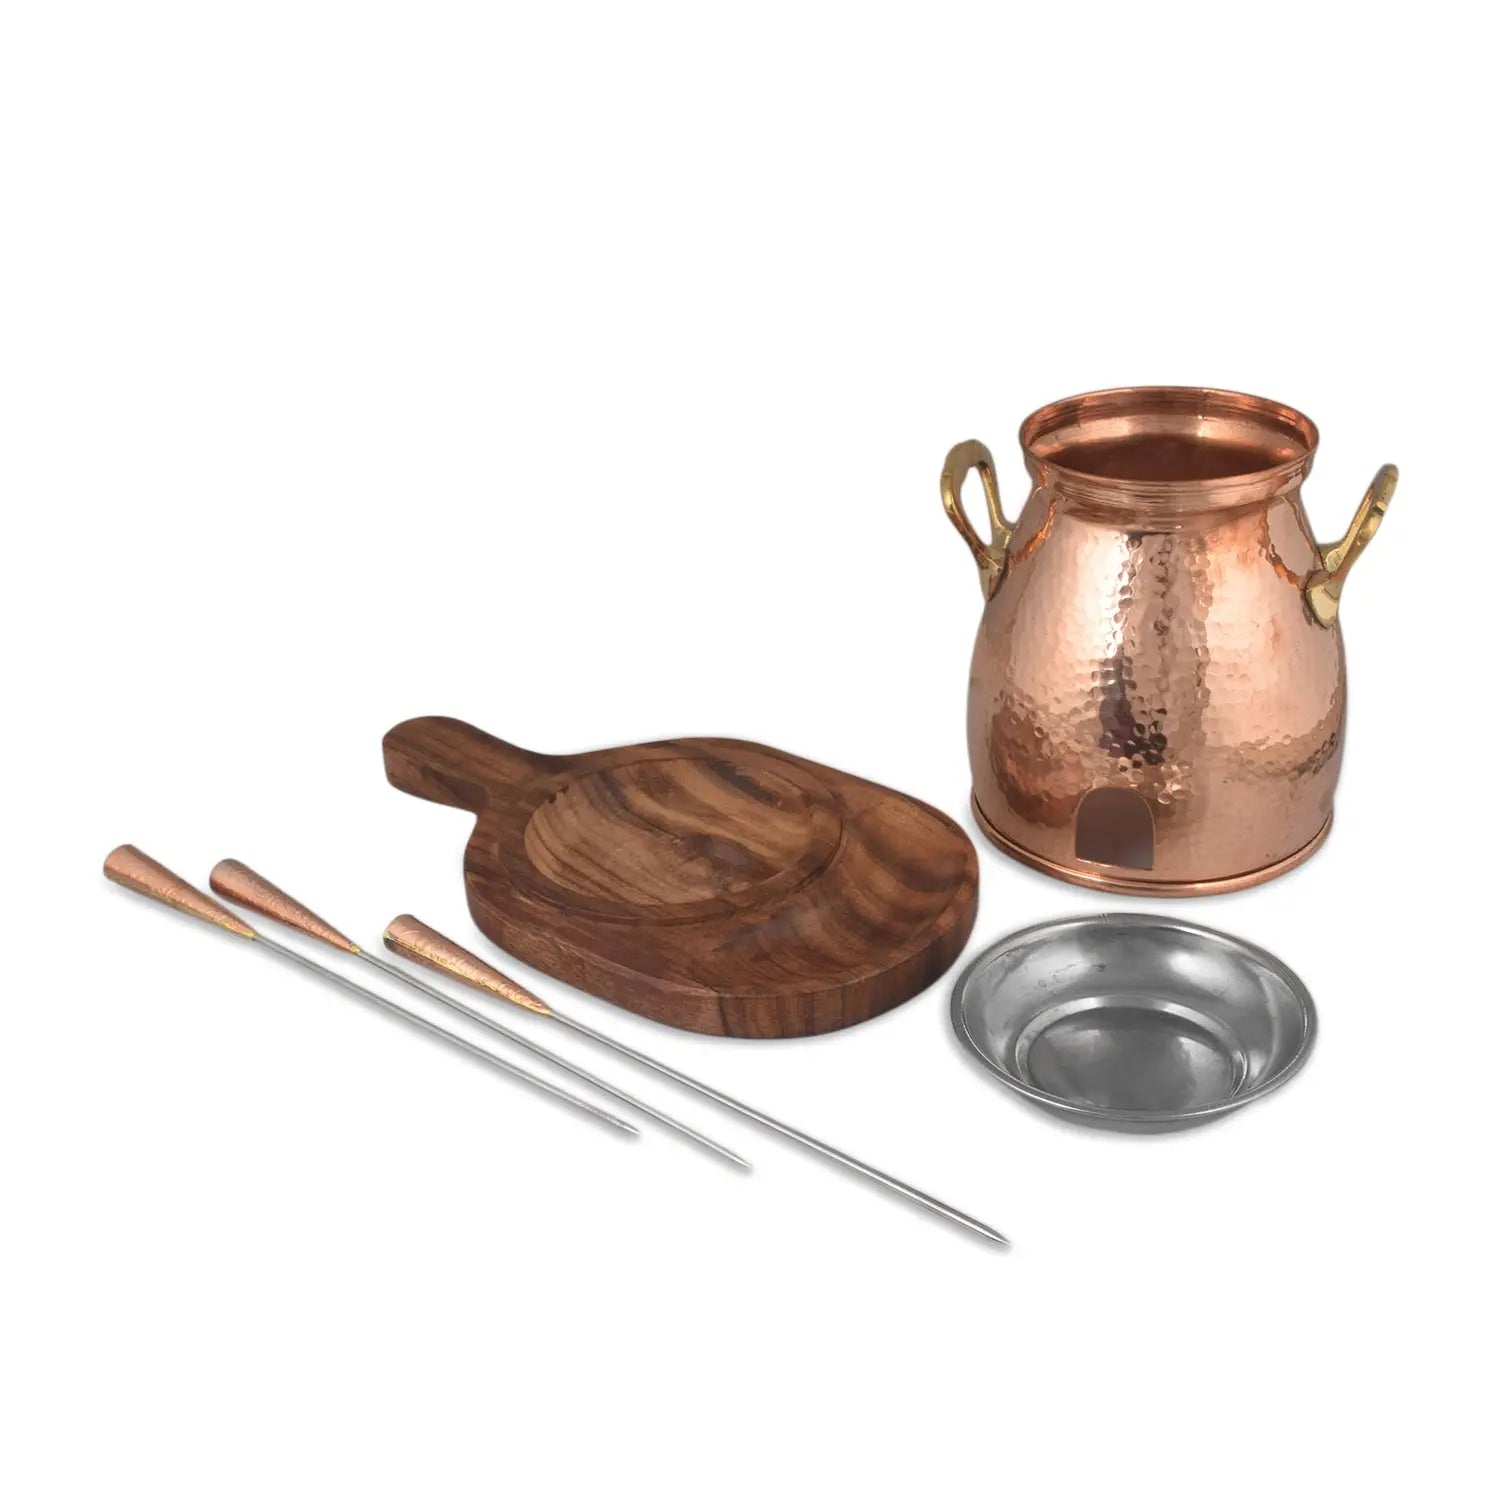 Copper Table Tandoor Set with Wooden Base with 3 barbeque Skewers and 1 Steel Plate - CROCKERY WALA AND COMPANY 